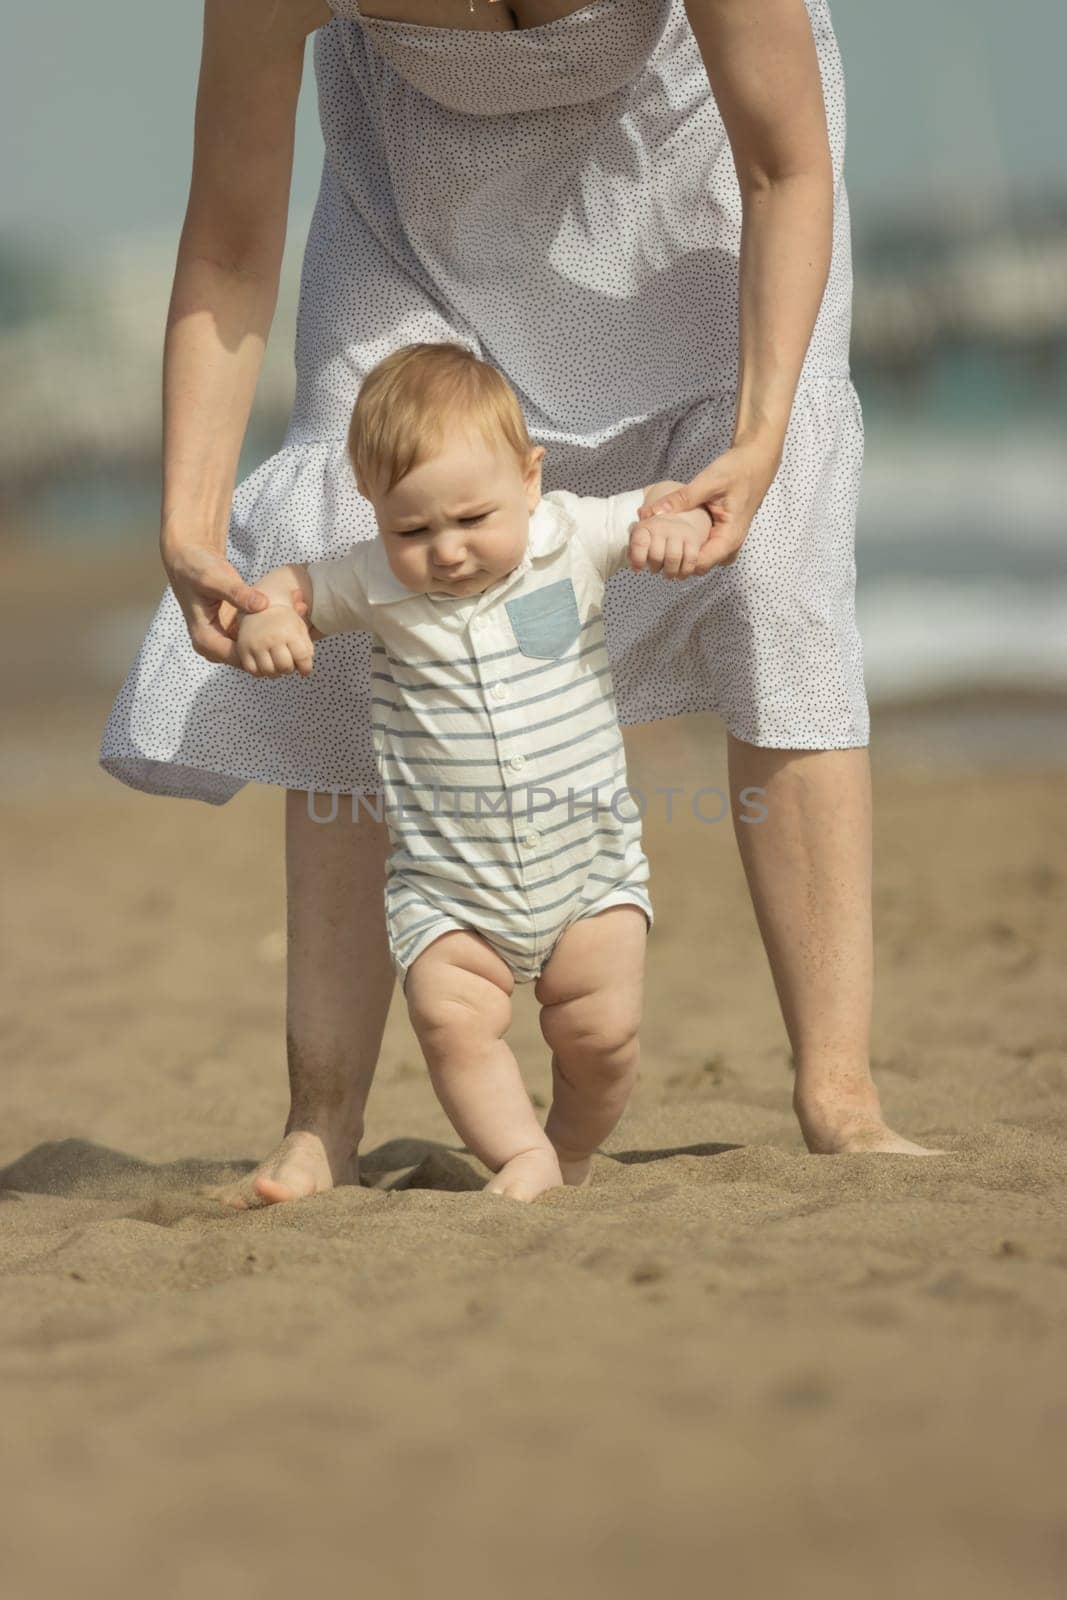 A little boy learns how to walk on the sand with support of his mother by Studia72